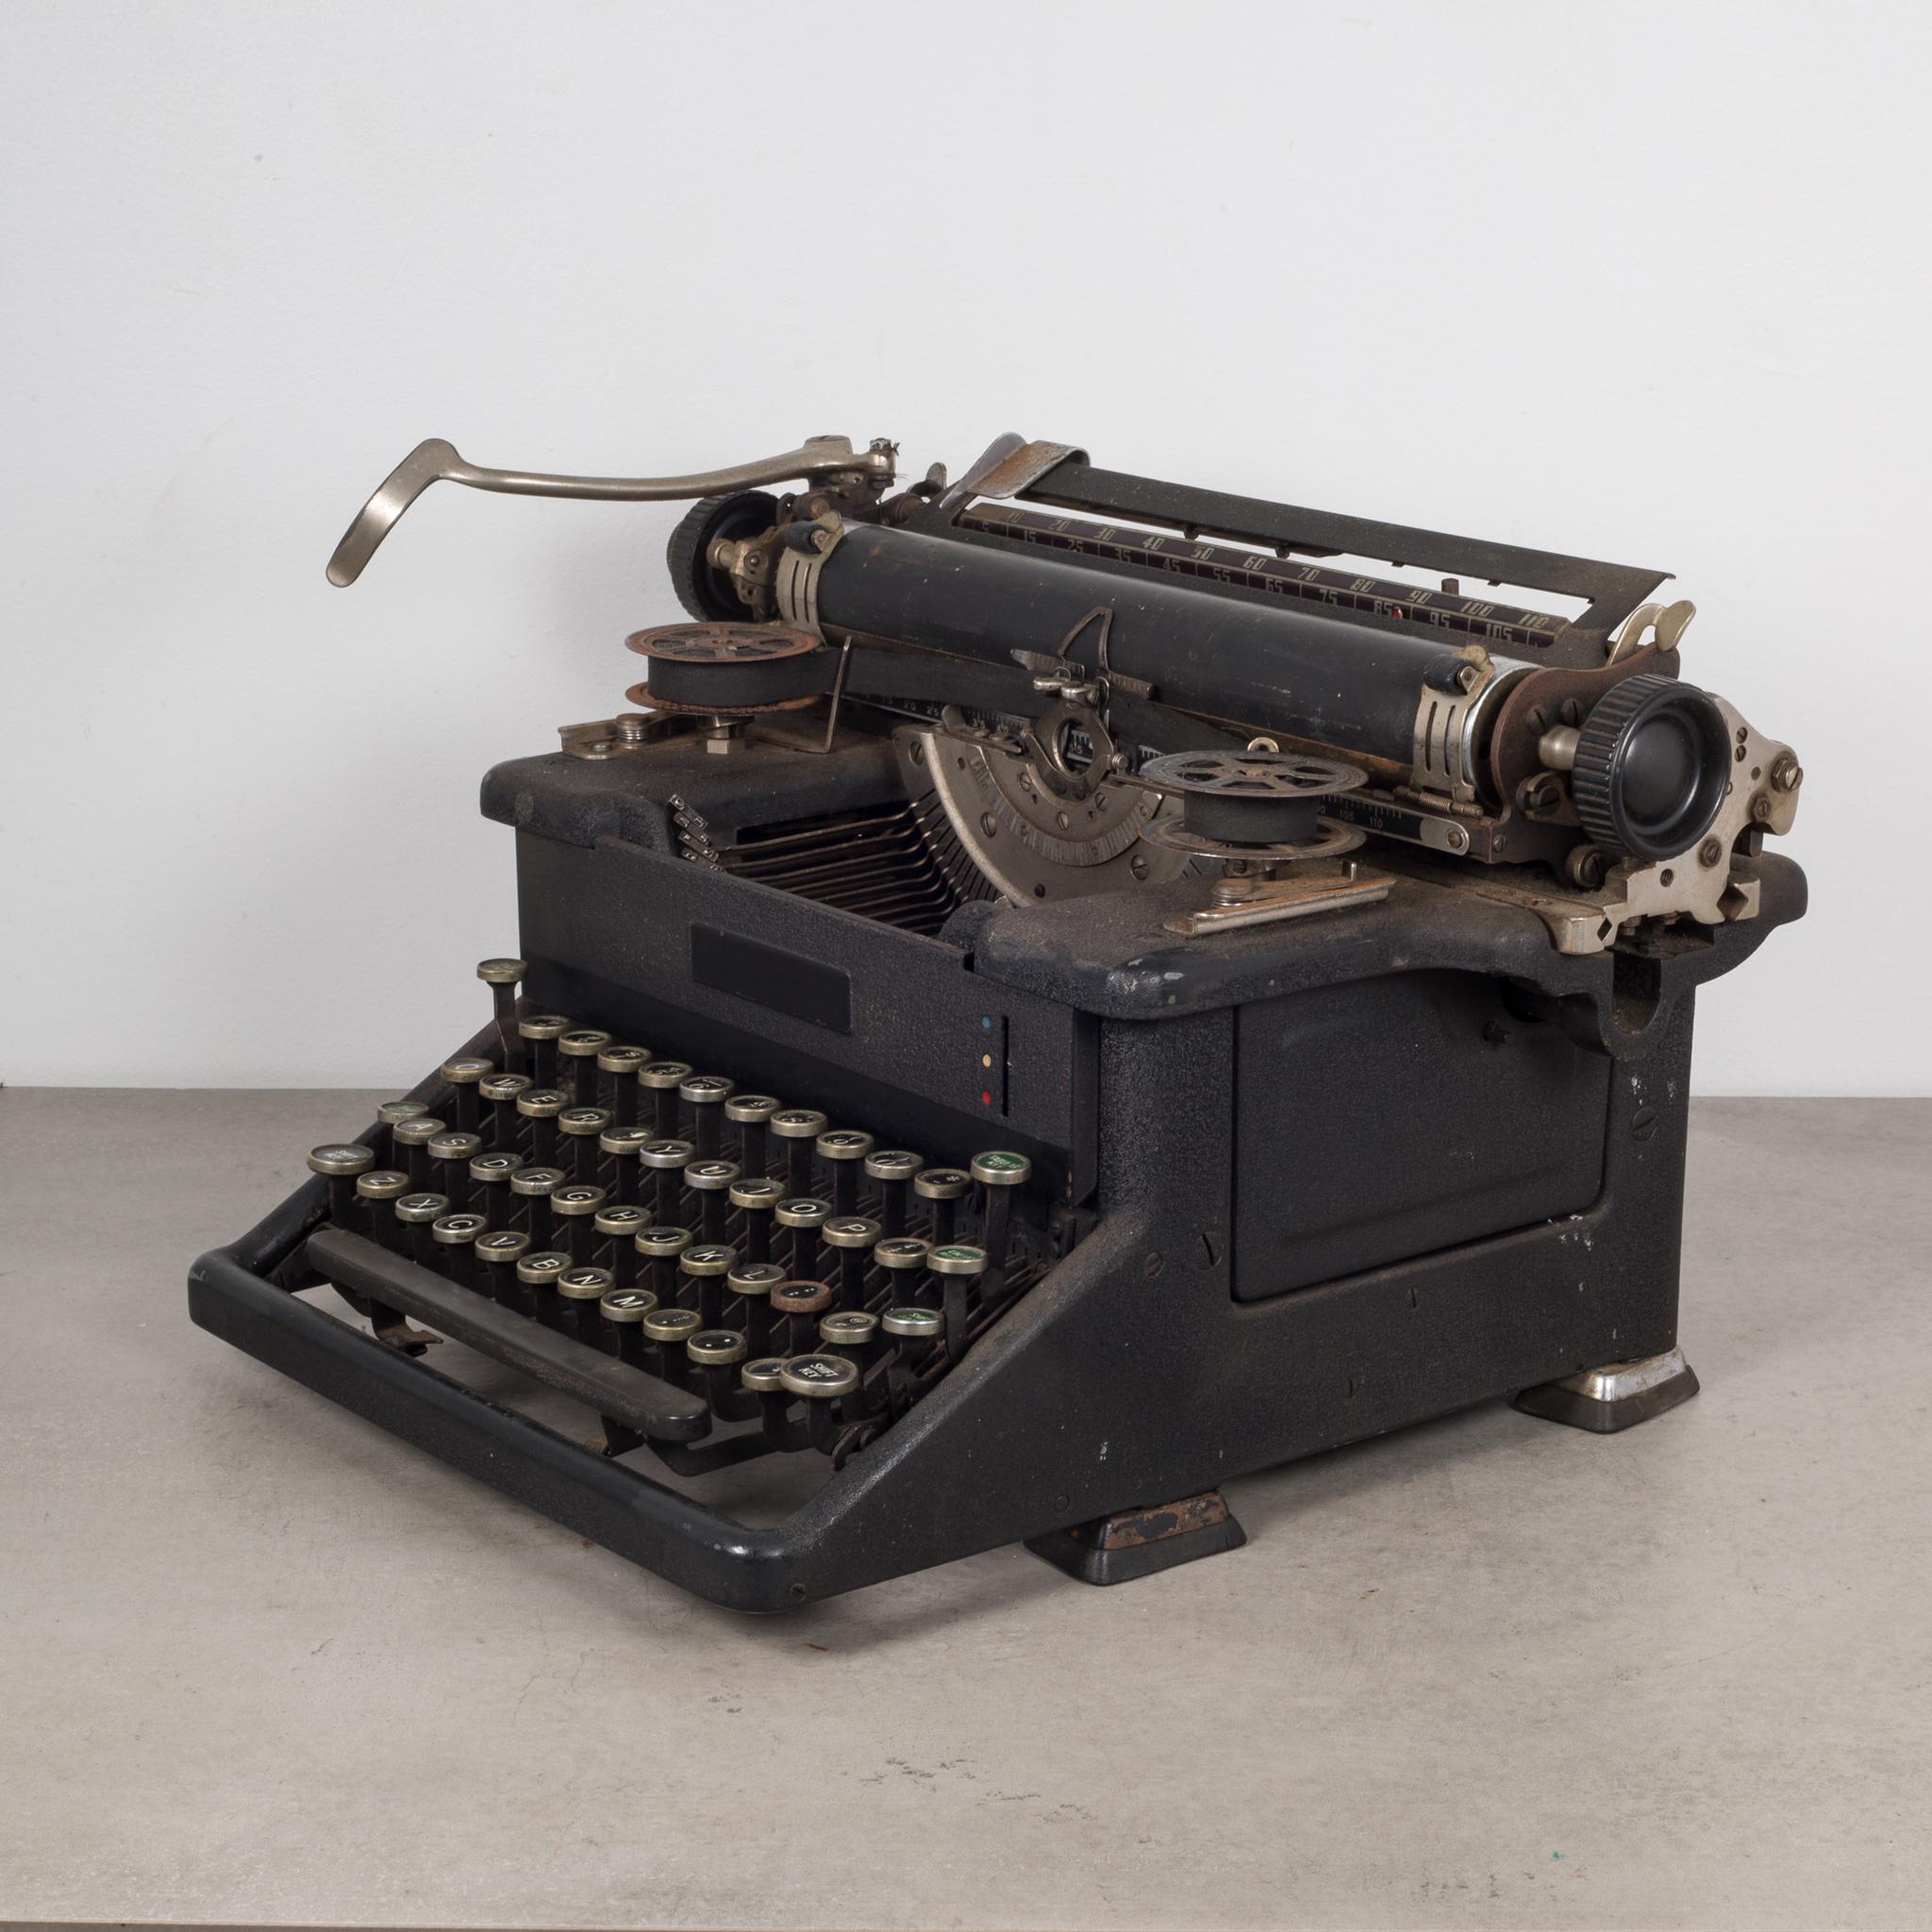 About

An antique distressed Woodstock typewriter #5 with a 16 inch carriage. The keys are black and green numbers with four rows of keys. The carriage slides smoothly from side to side.

 Creator: Woodstock Typewriter Company.
 Date of